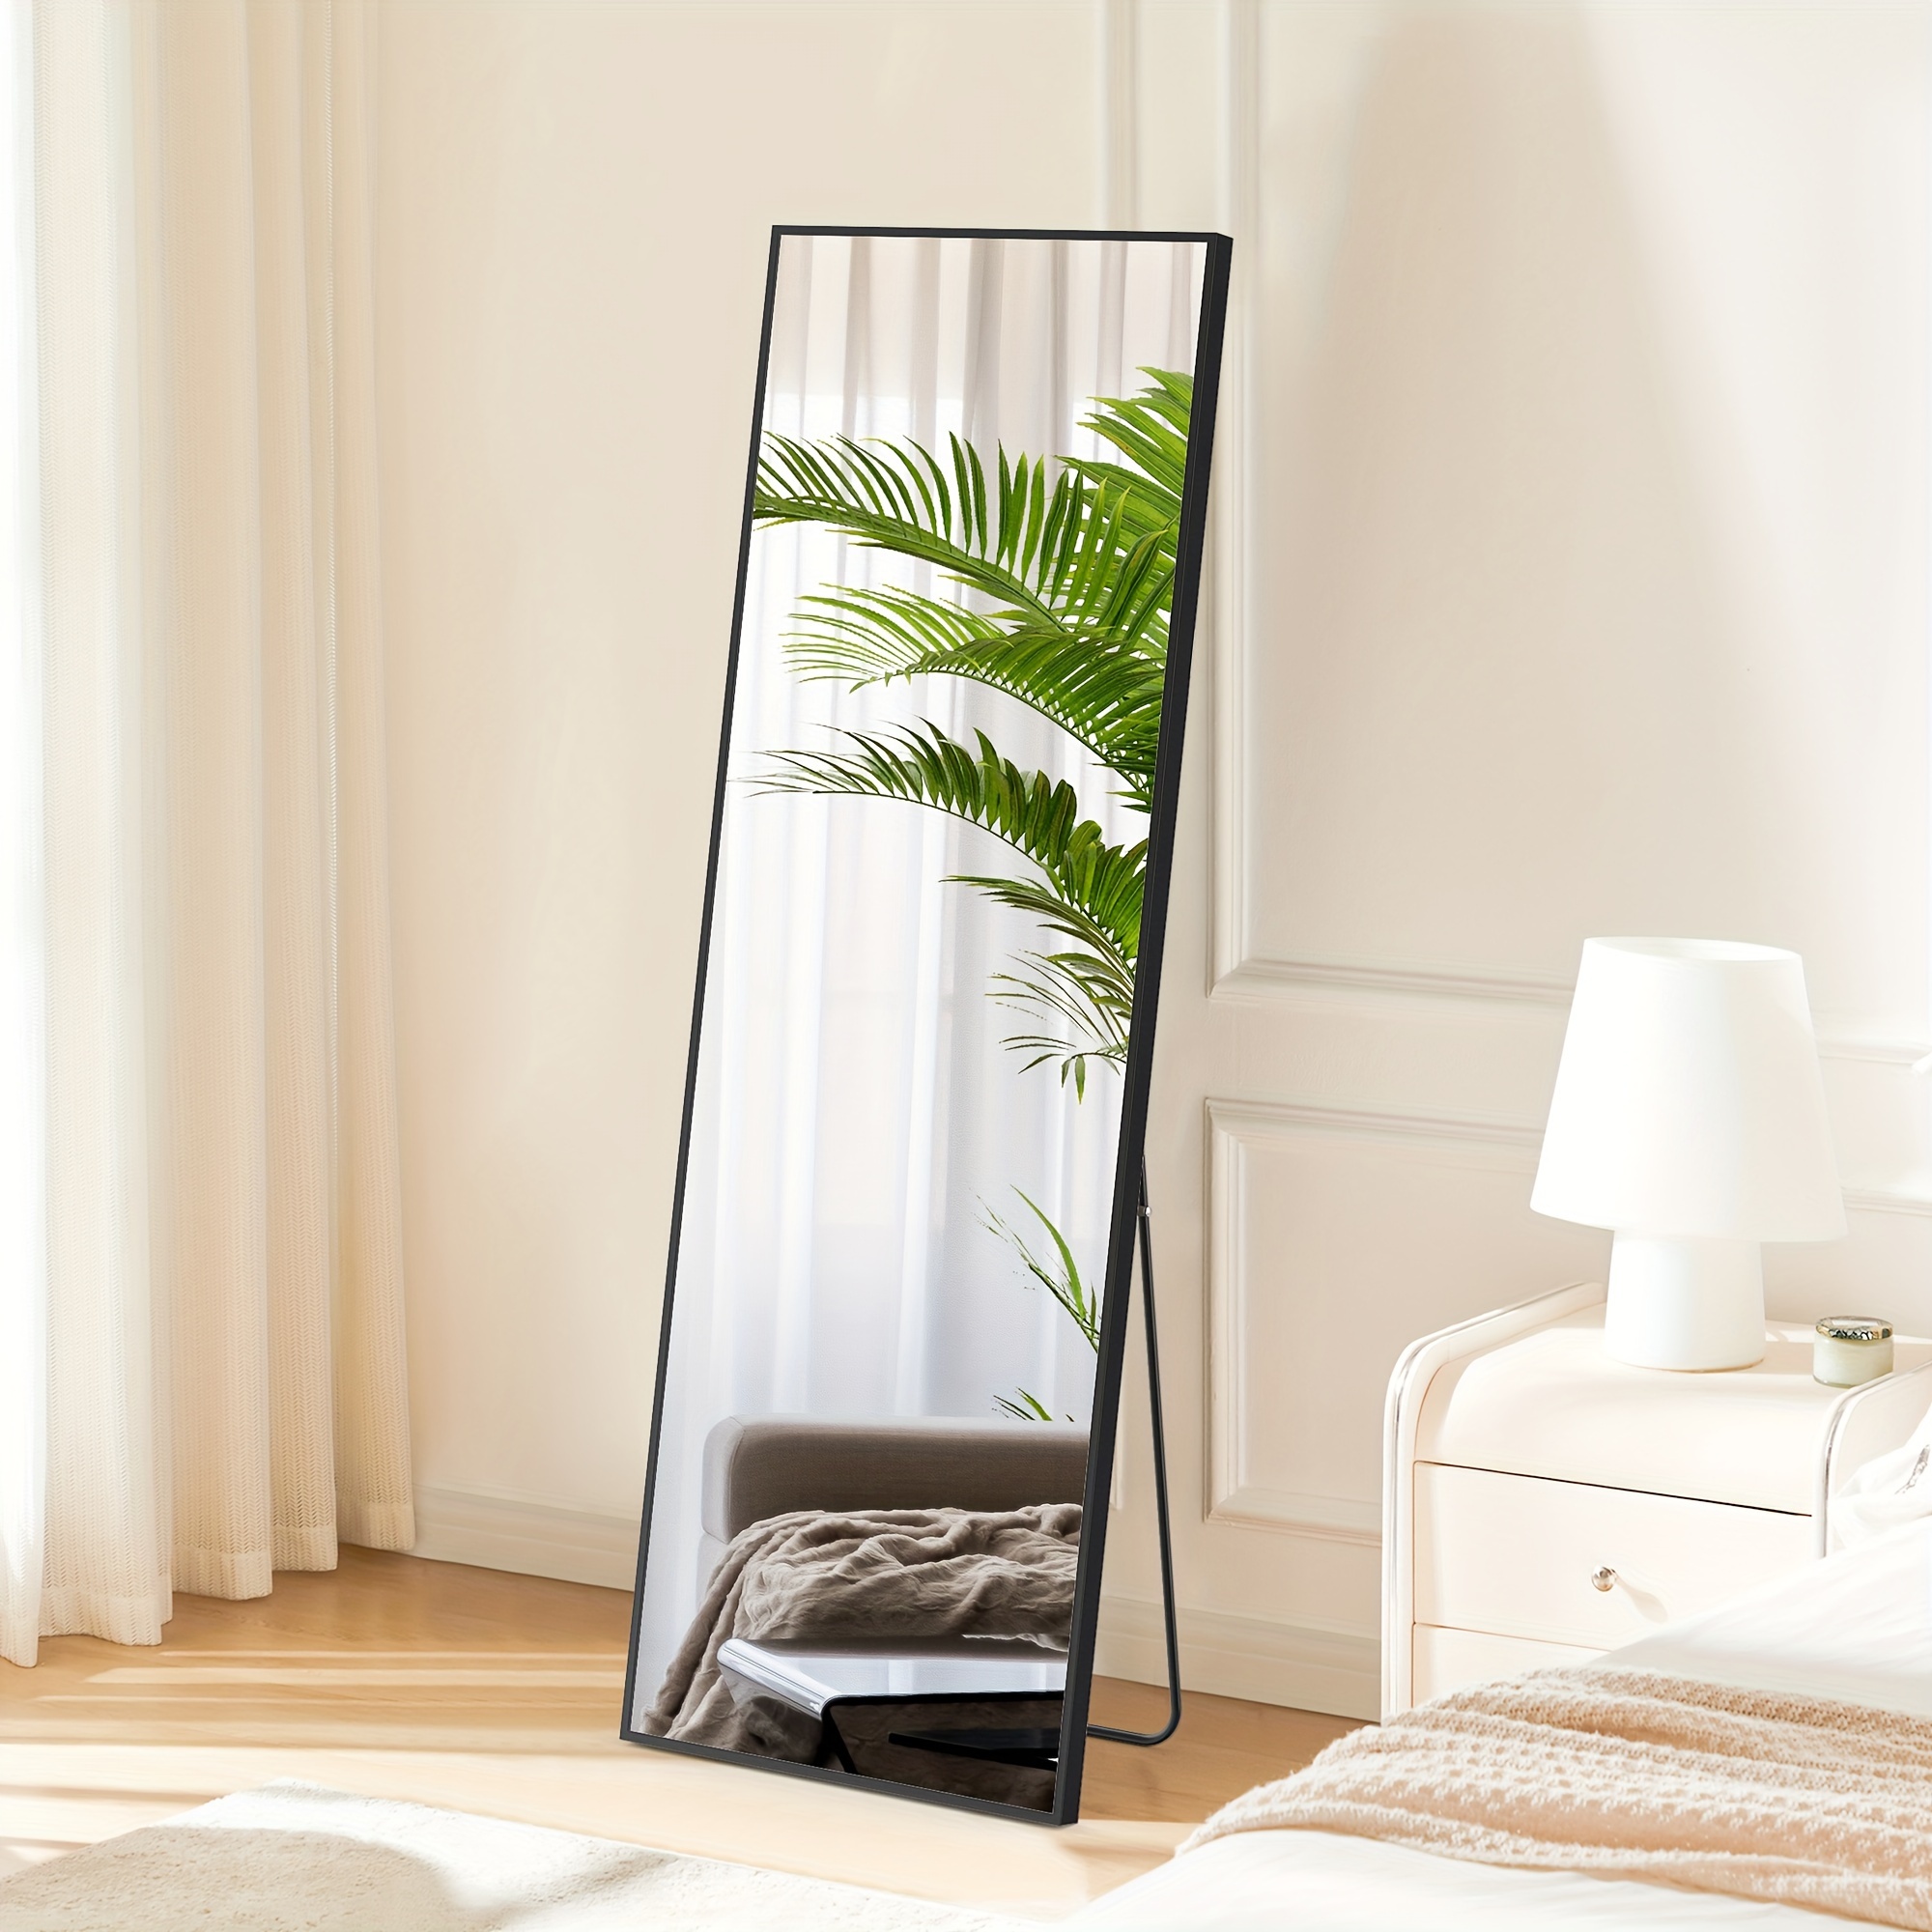 

Full Length Mirror For Hotel, 59x16in Size With Stand, Tall Full Body Mirror, Hanging Or Leaning For Wall, Aluminum Alloy Thin Frame Floor Standing For Living Room, Bedroom, Lounge, Dress Room